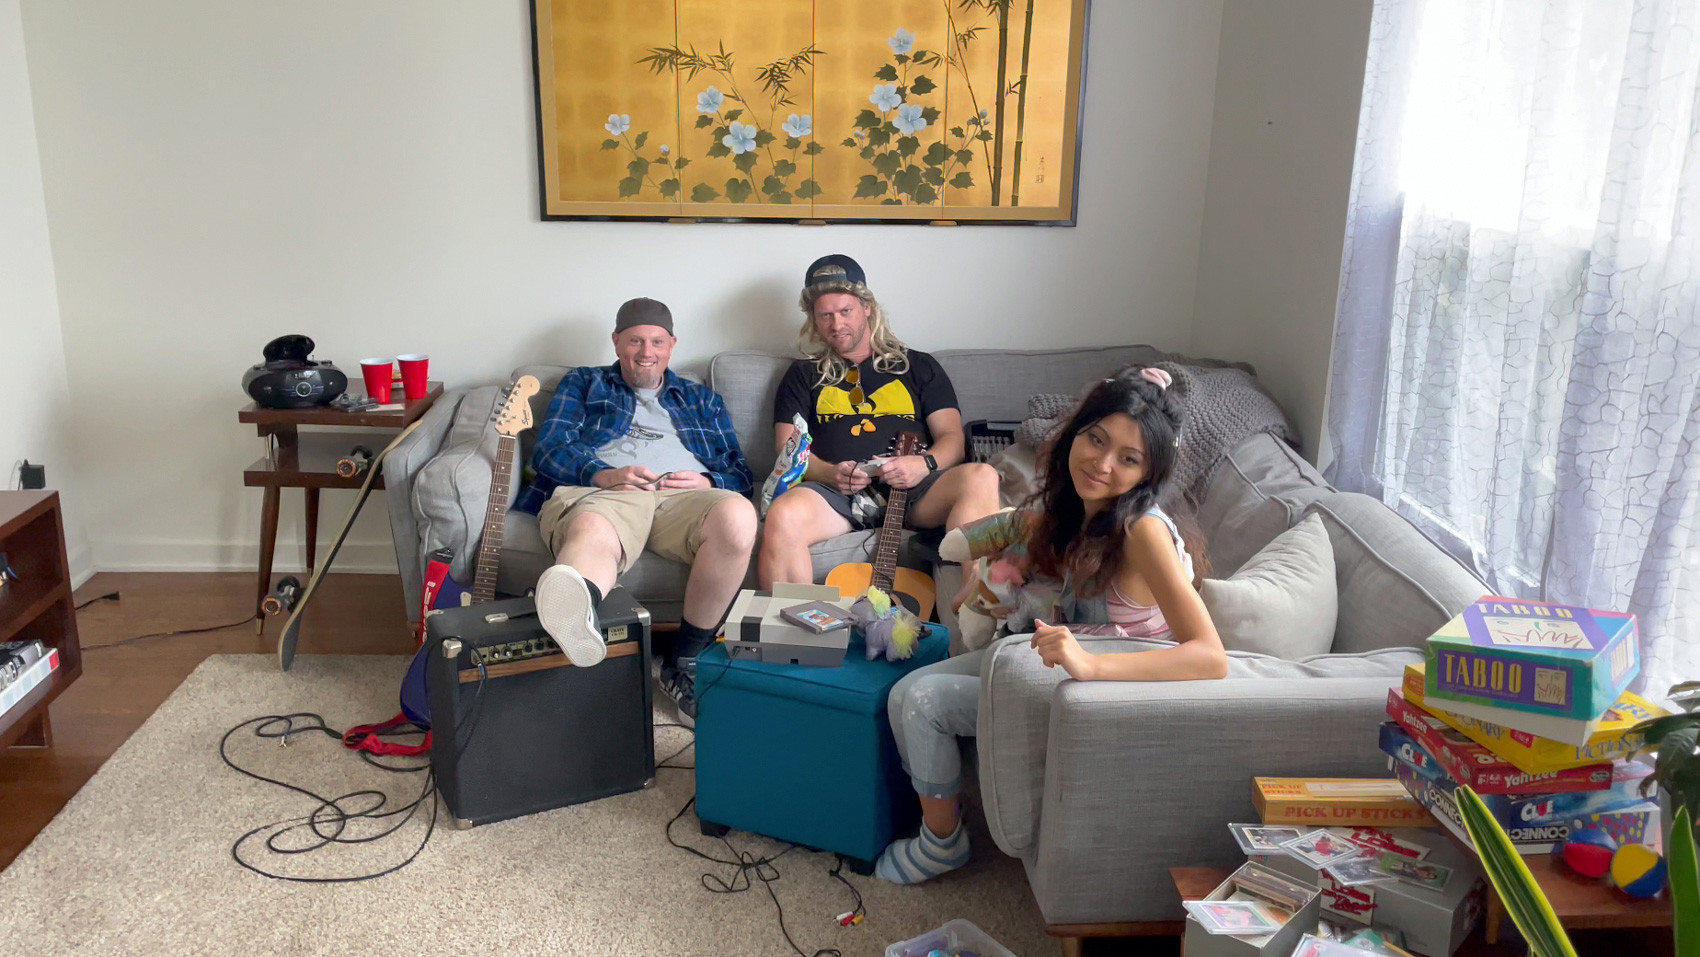 Three team members sitting on a couch together